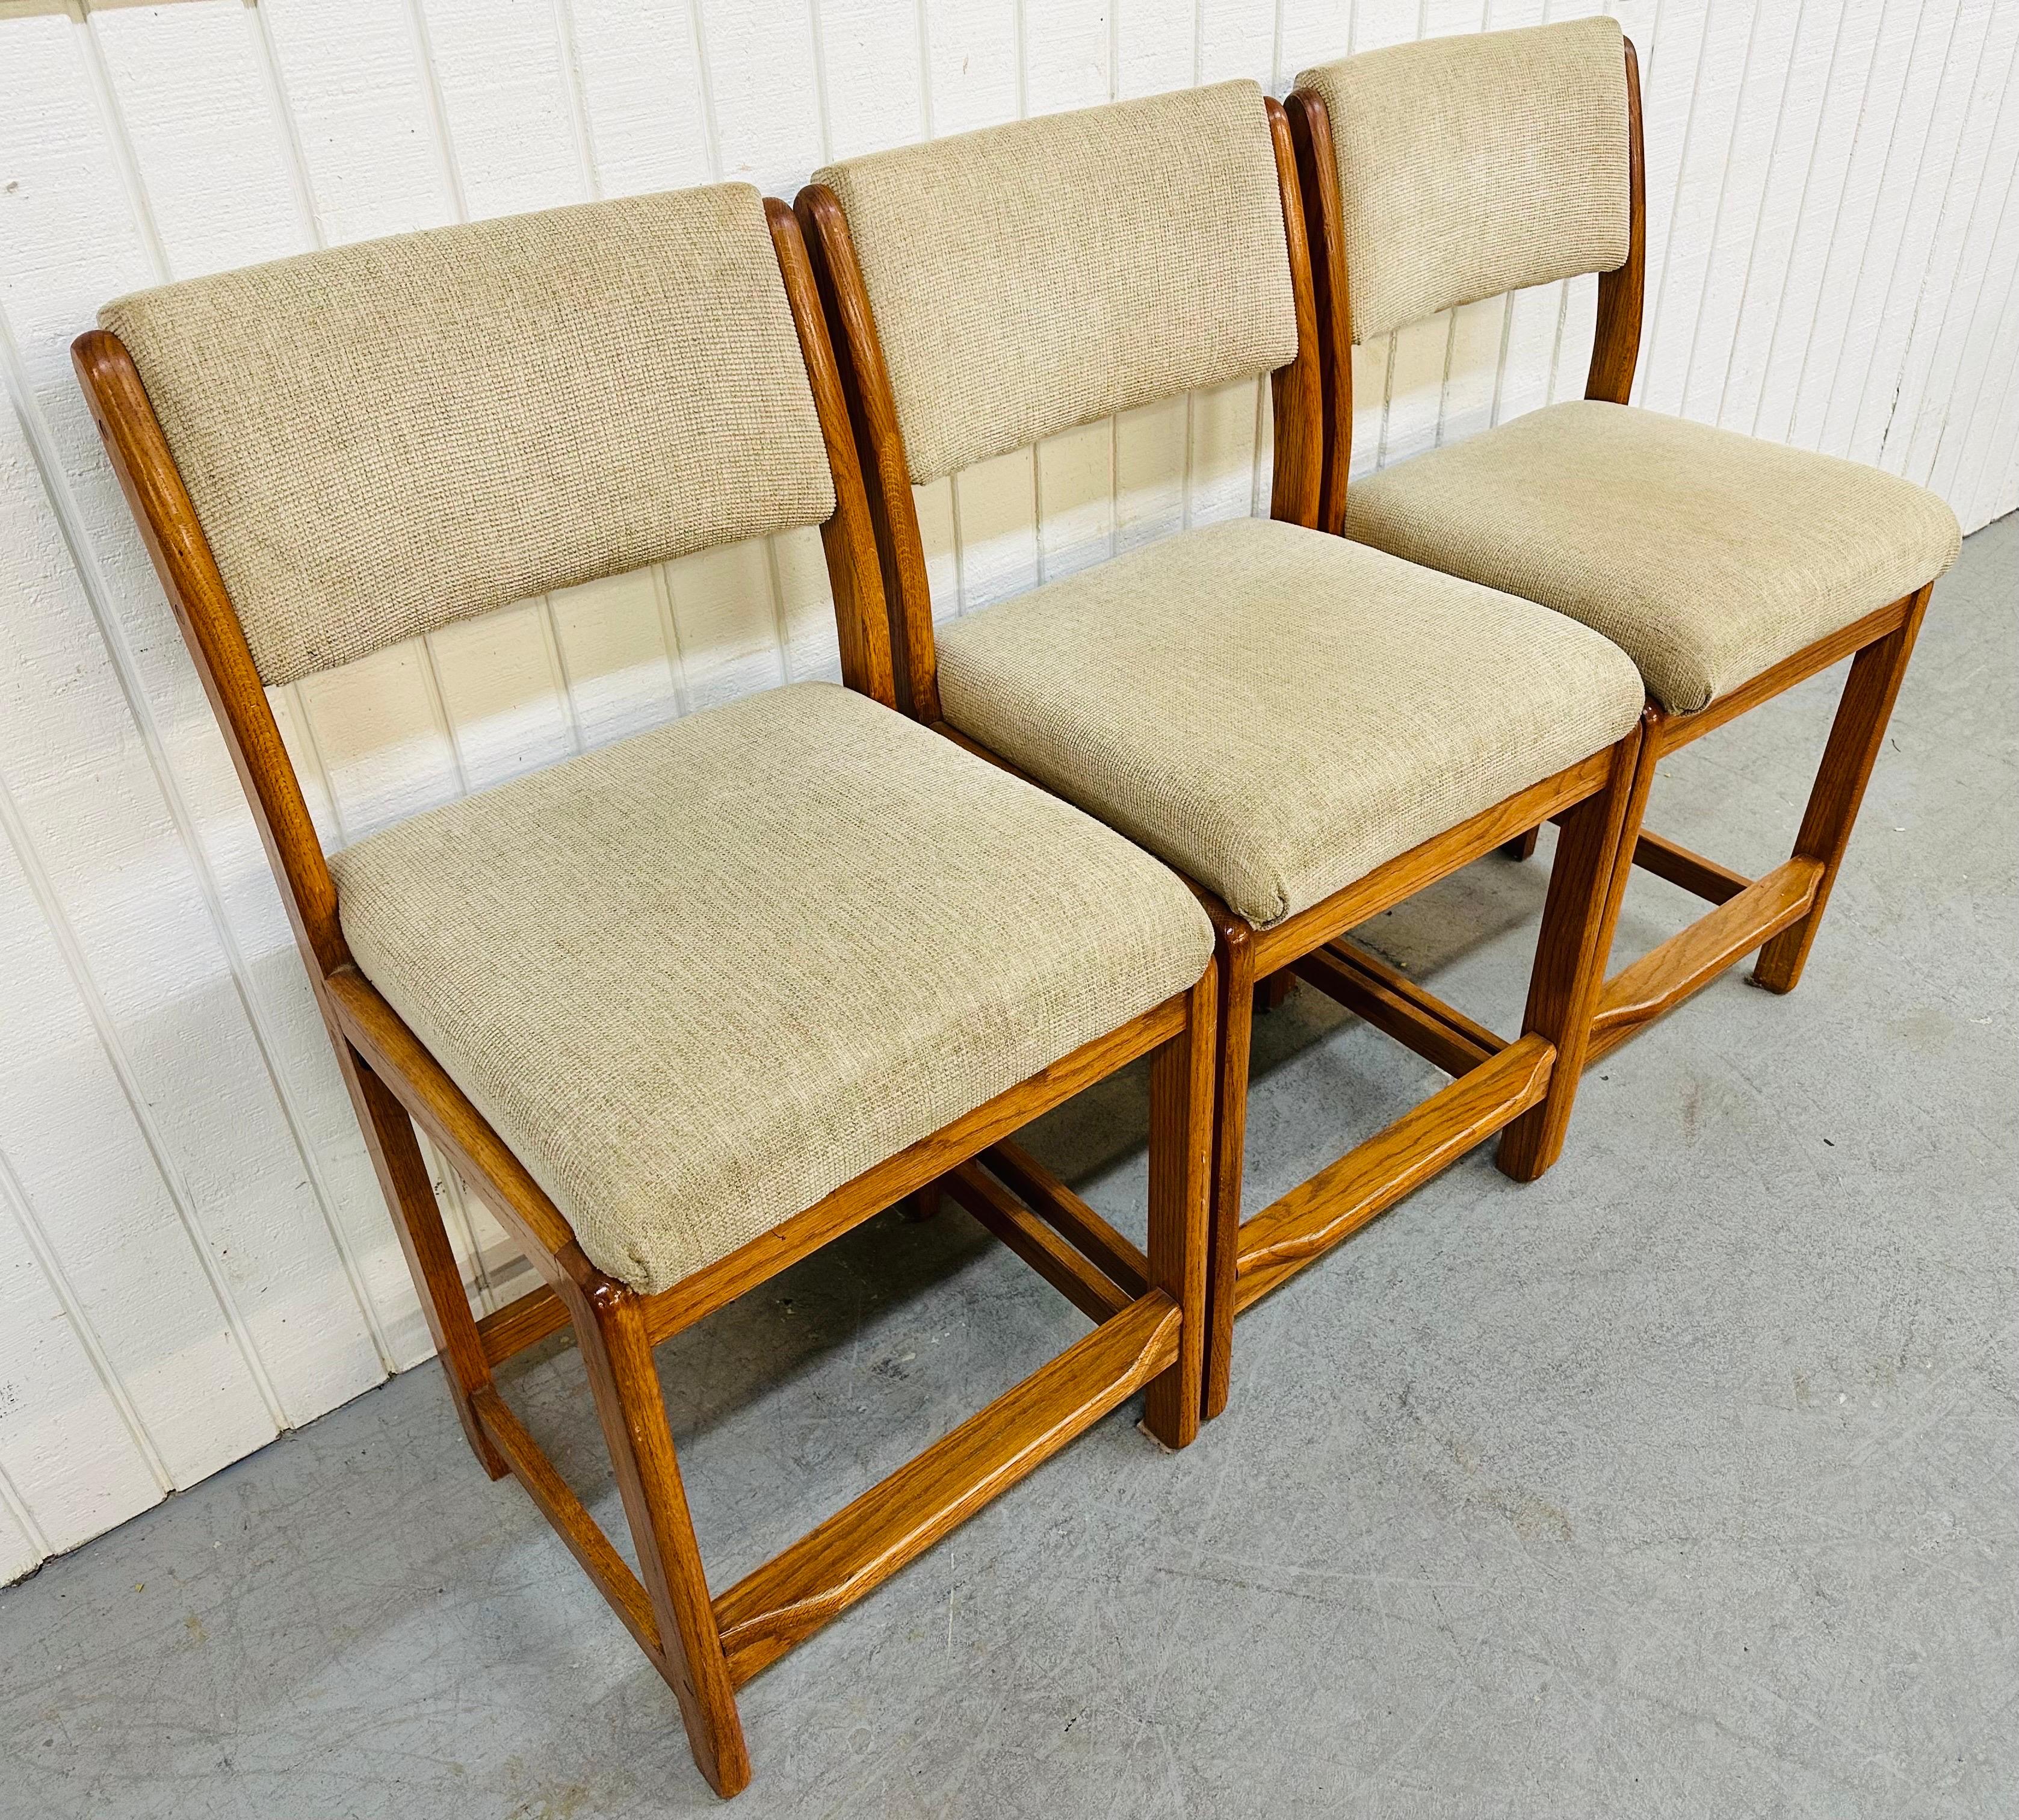 This listing is for a set of three vintage Danish Modern Bar Stools. Featuring oak frames with a teak color finish, tan upholstered seats, and tan upholstered back rests. This stools could be used for your counter or bar!